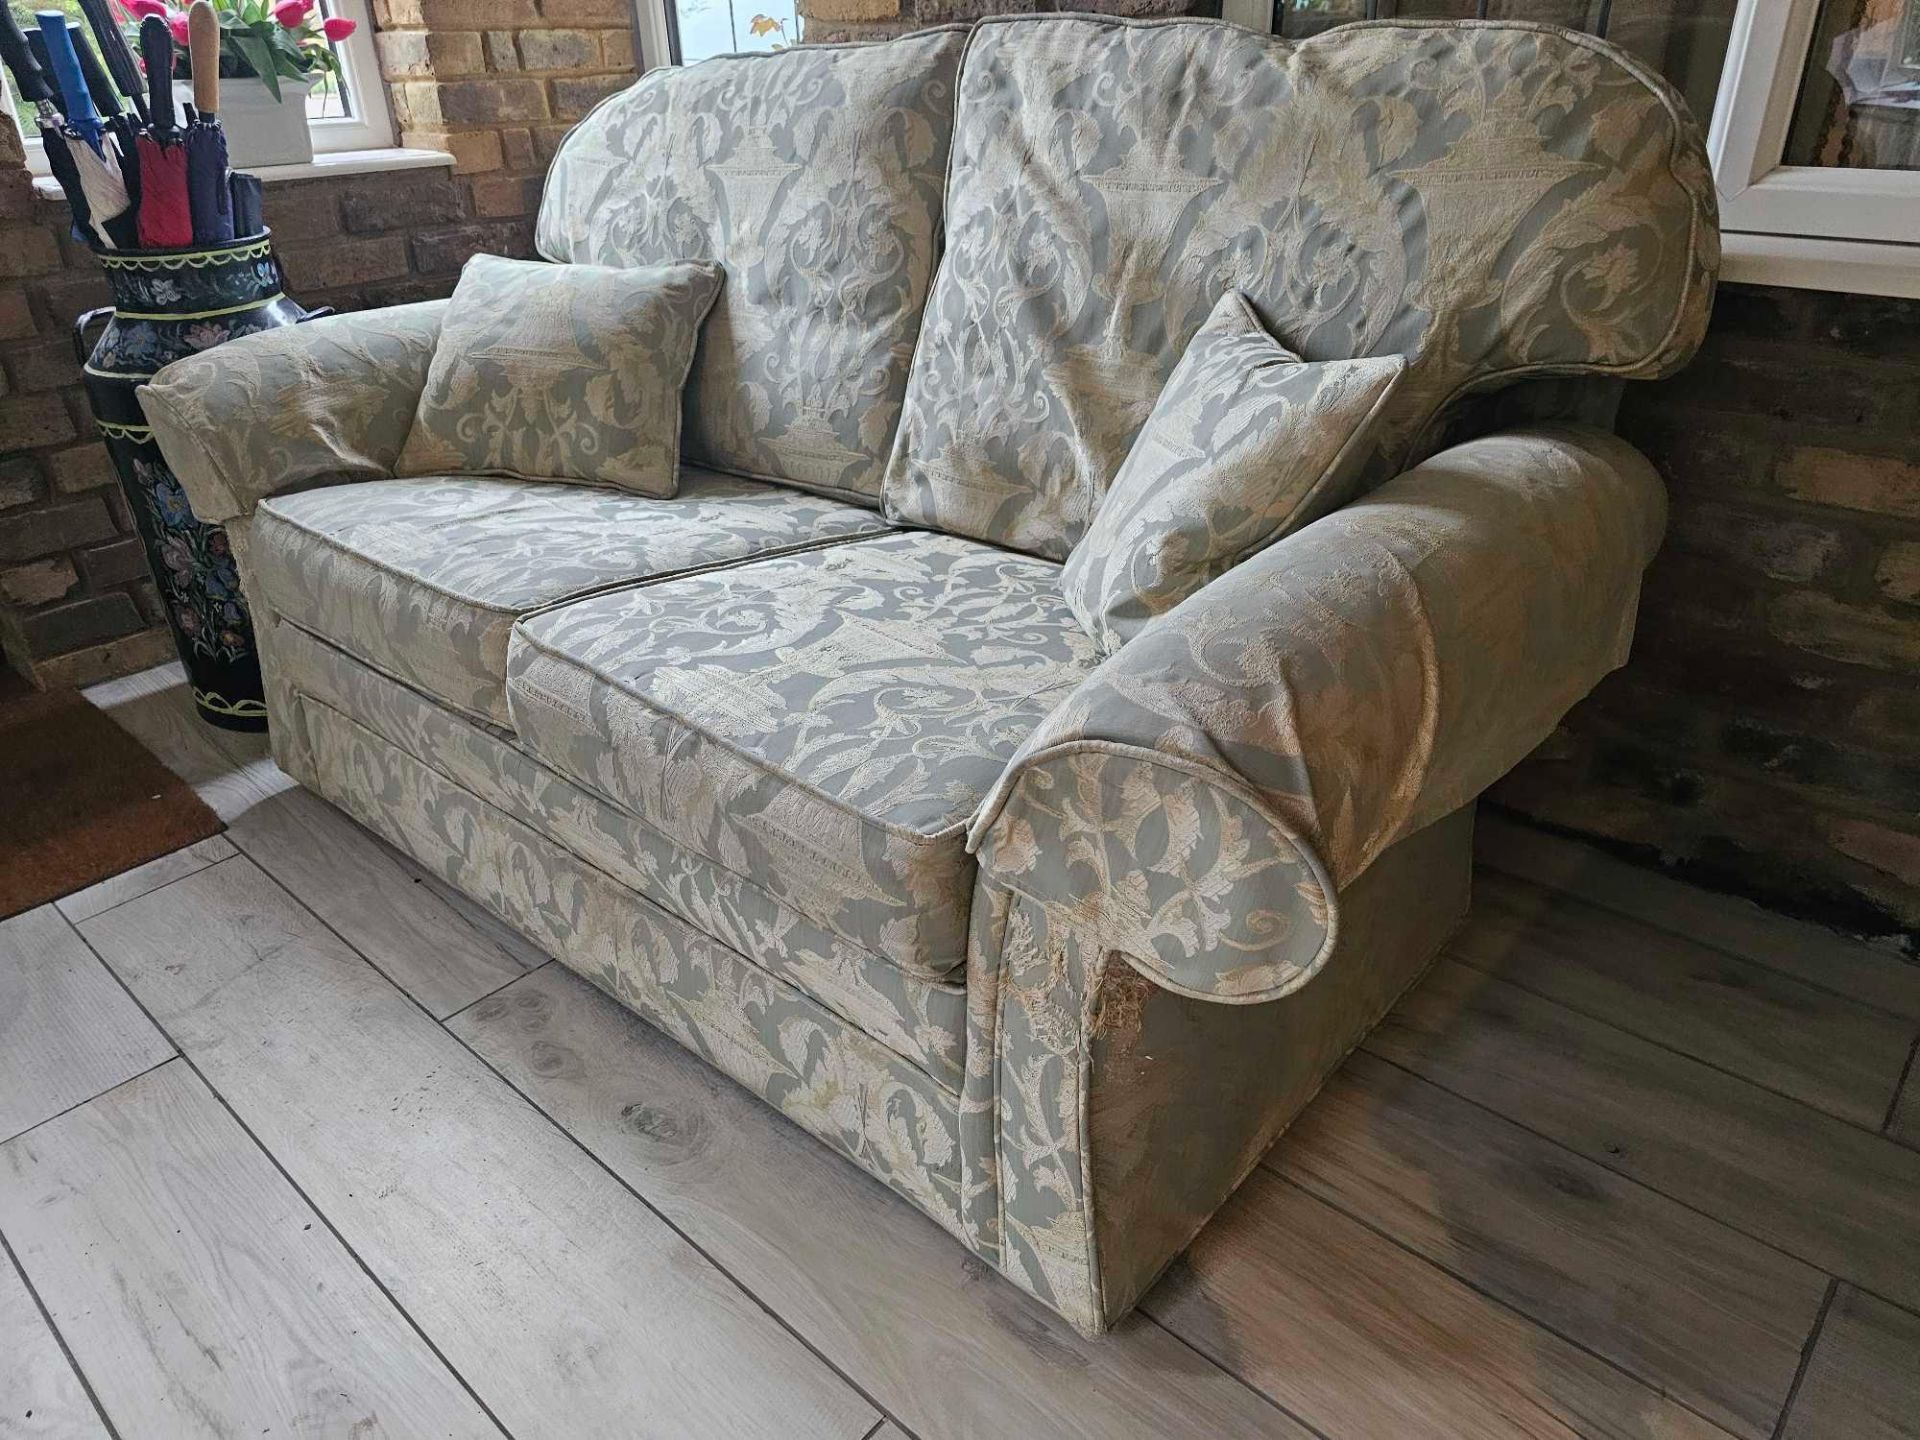 A Peter Guild Upholstered Two Seater Sofa In Damask Embossed Pattern Mint And Gold 160 X 87 X 95cm - Image 4 of 6